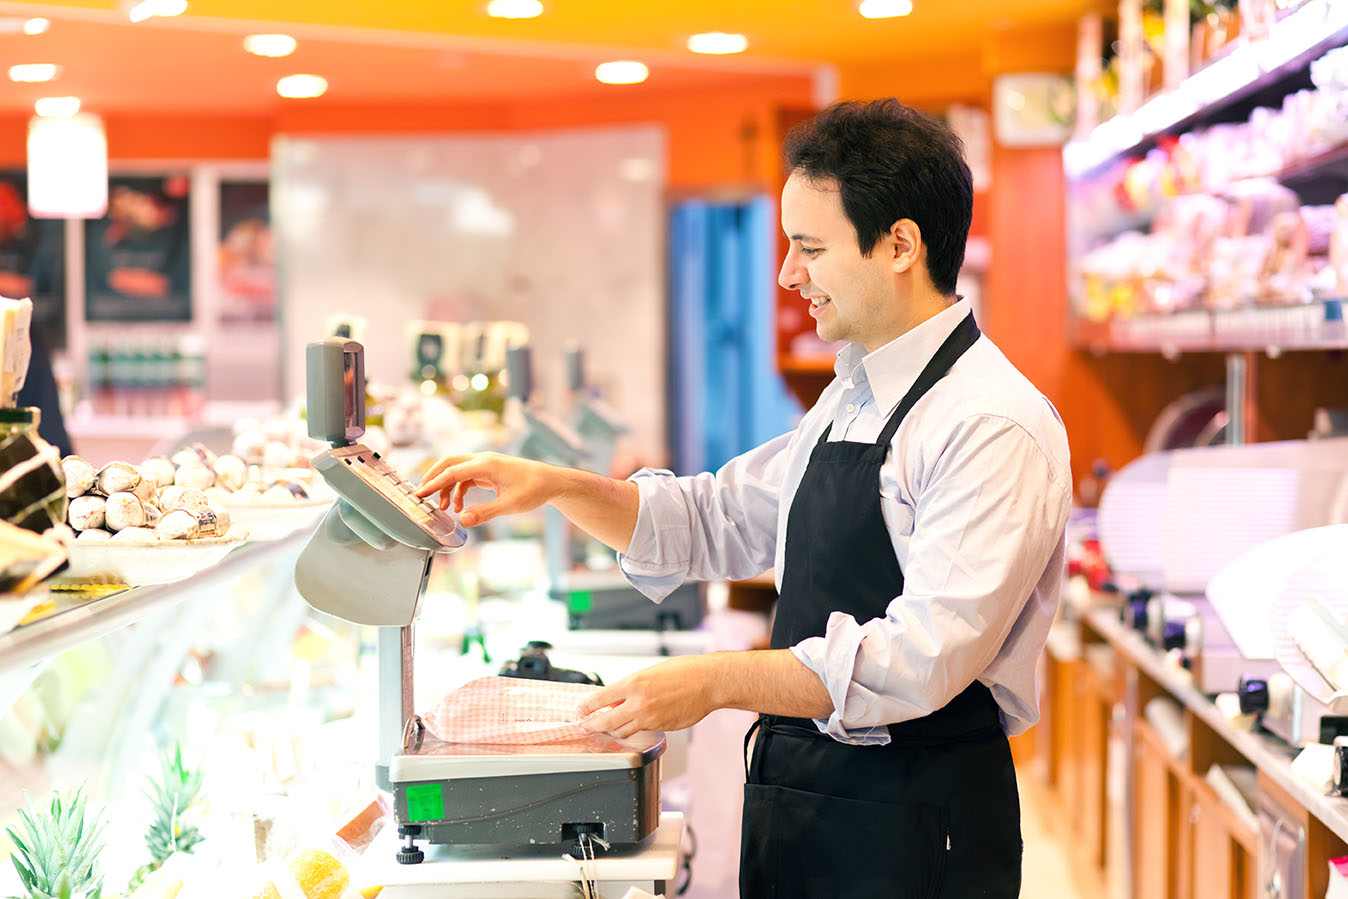 Grocery Stores Making Shift to Automation – Part 1